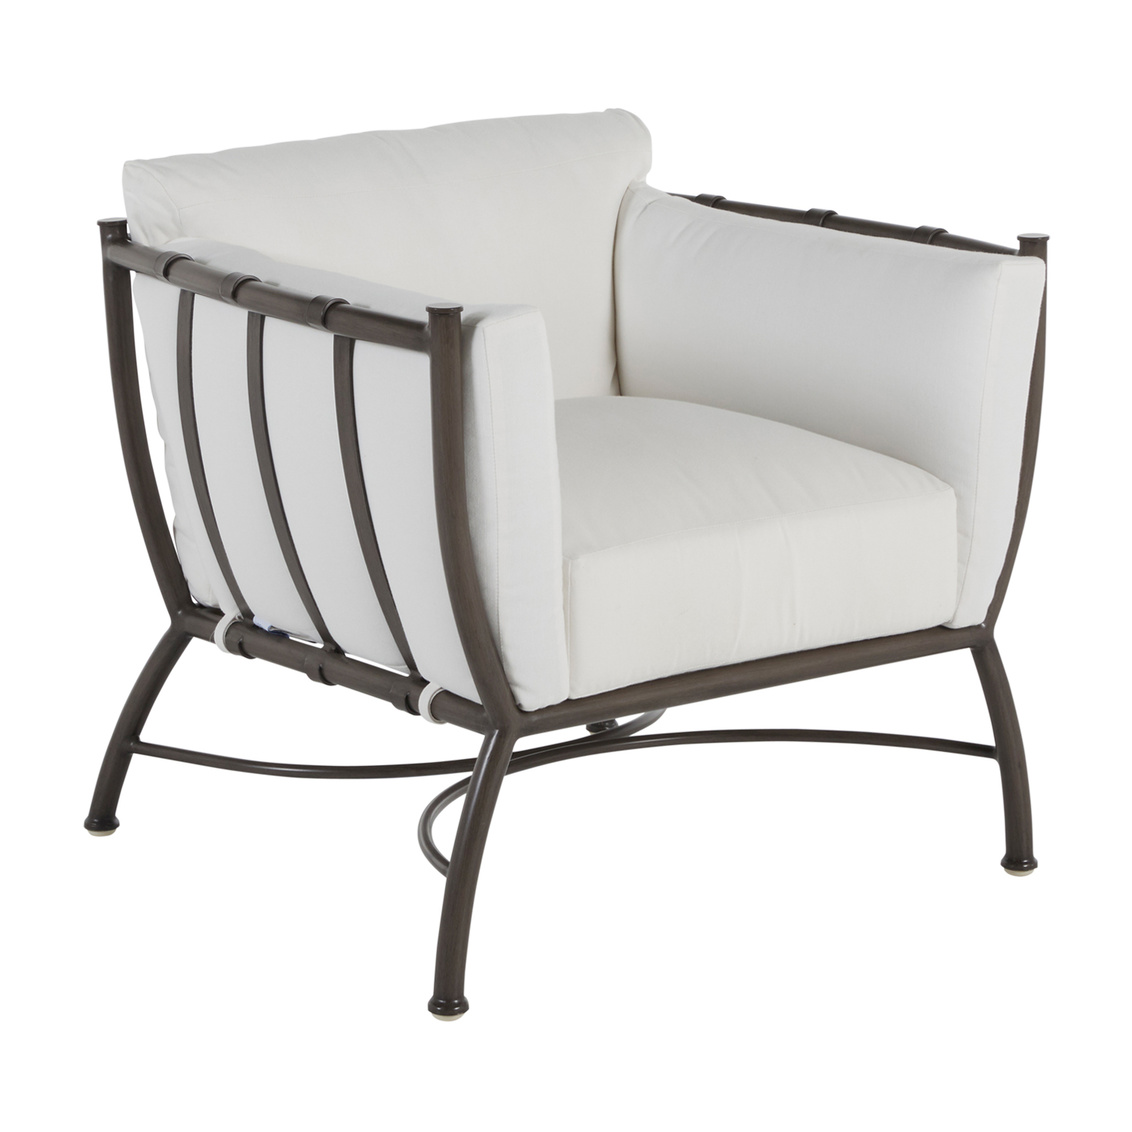 majorca club chair in slate grey – frame only product image